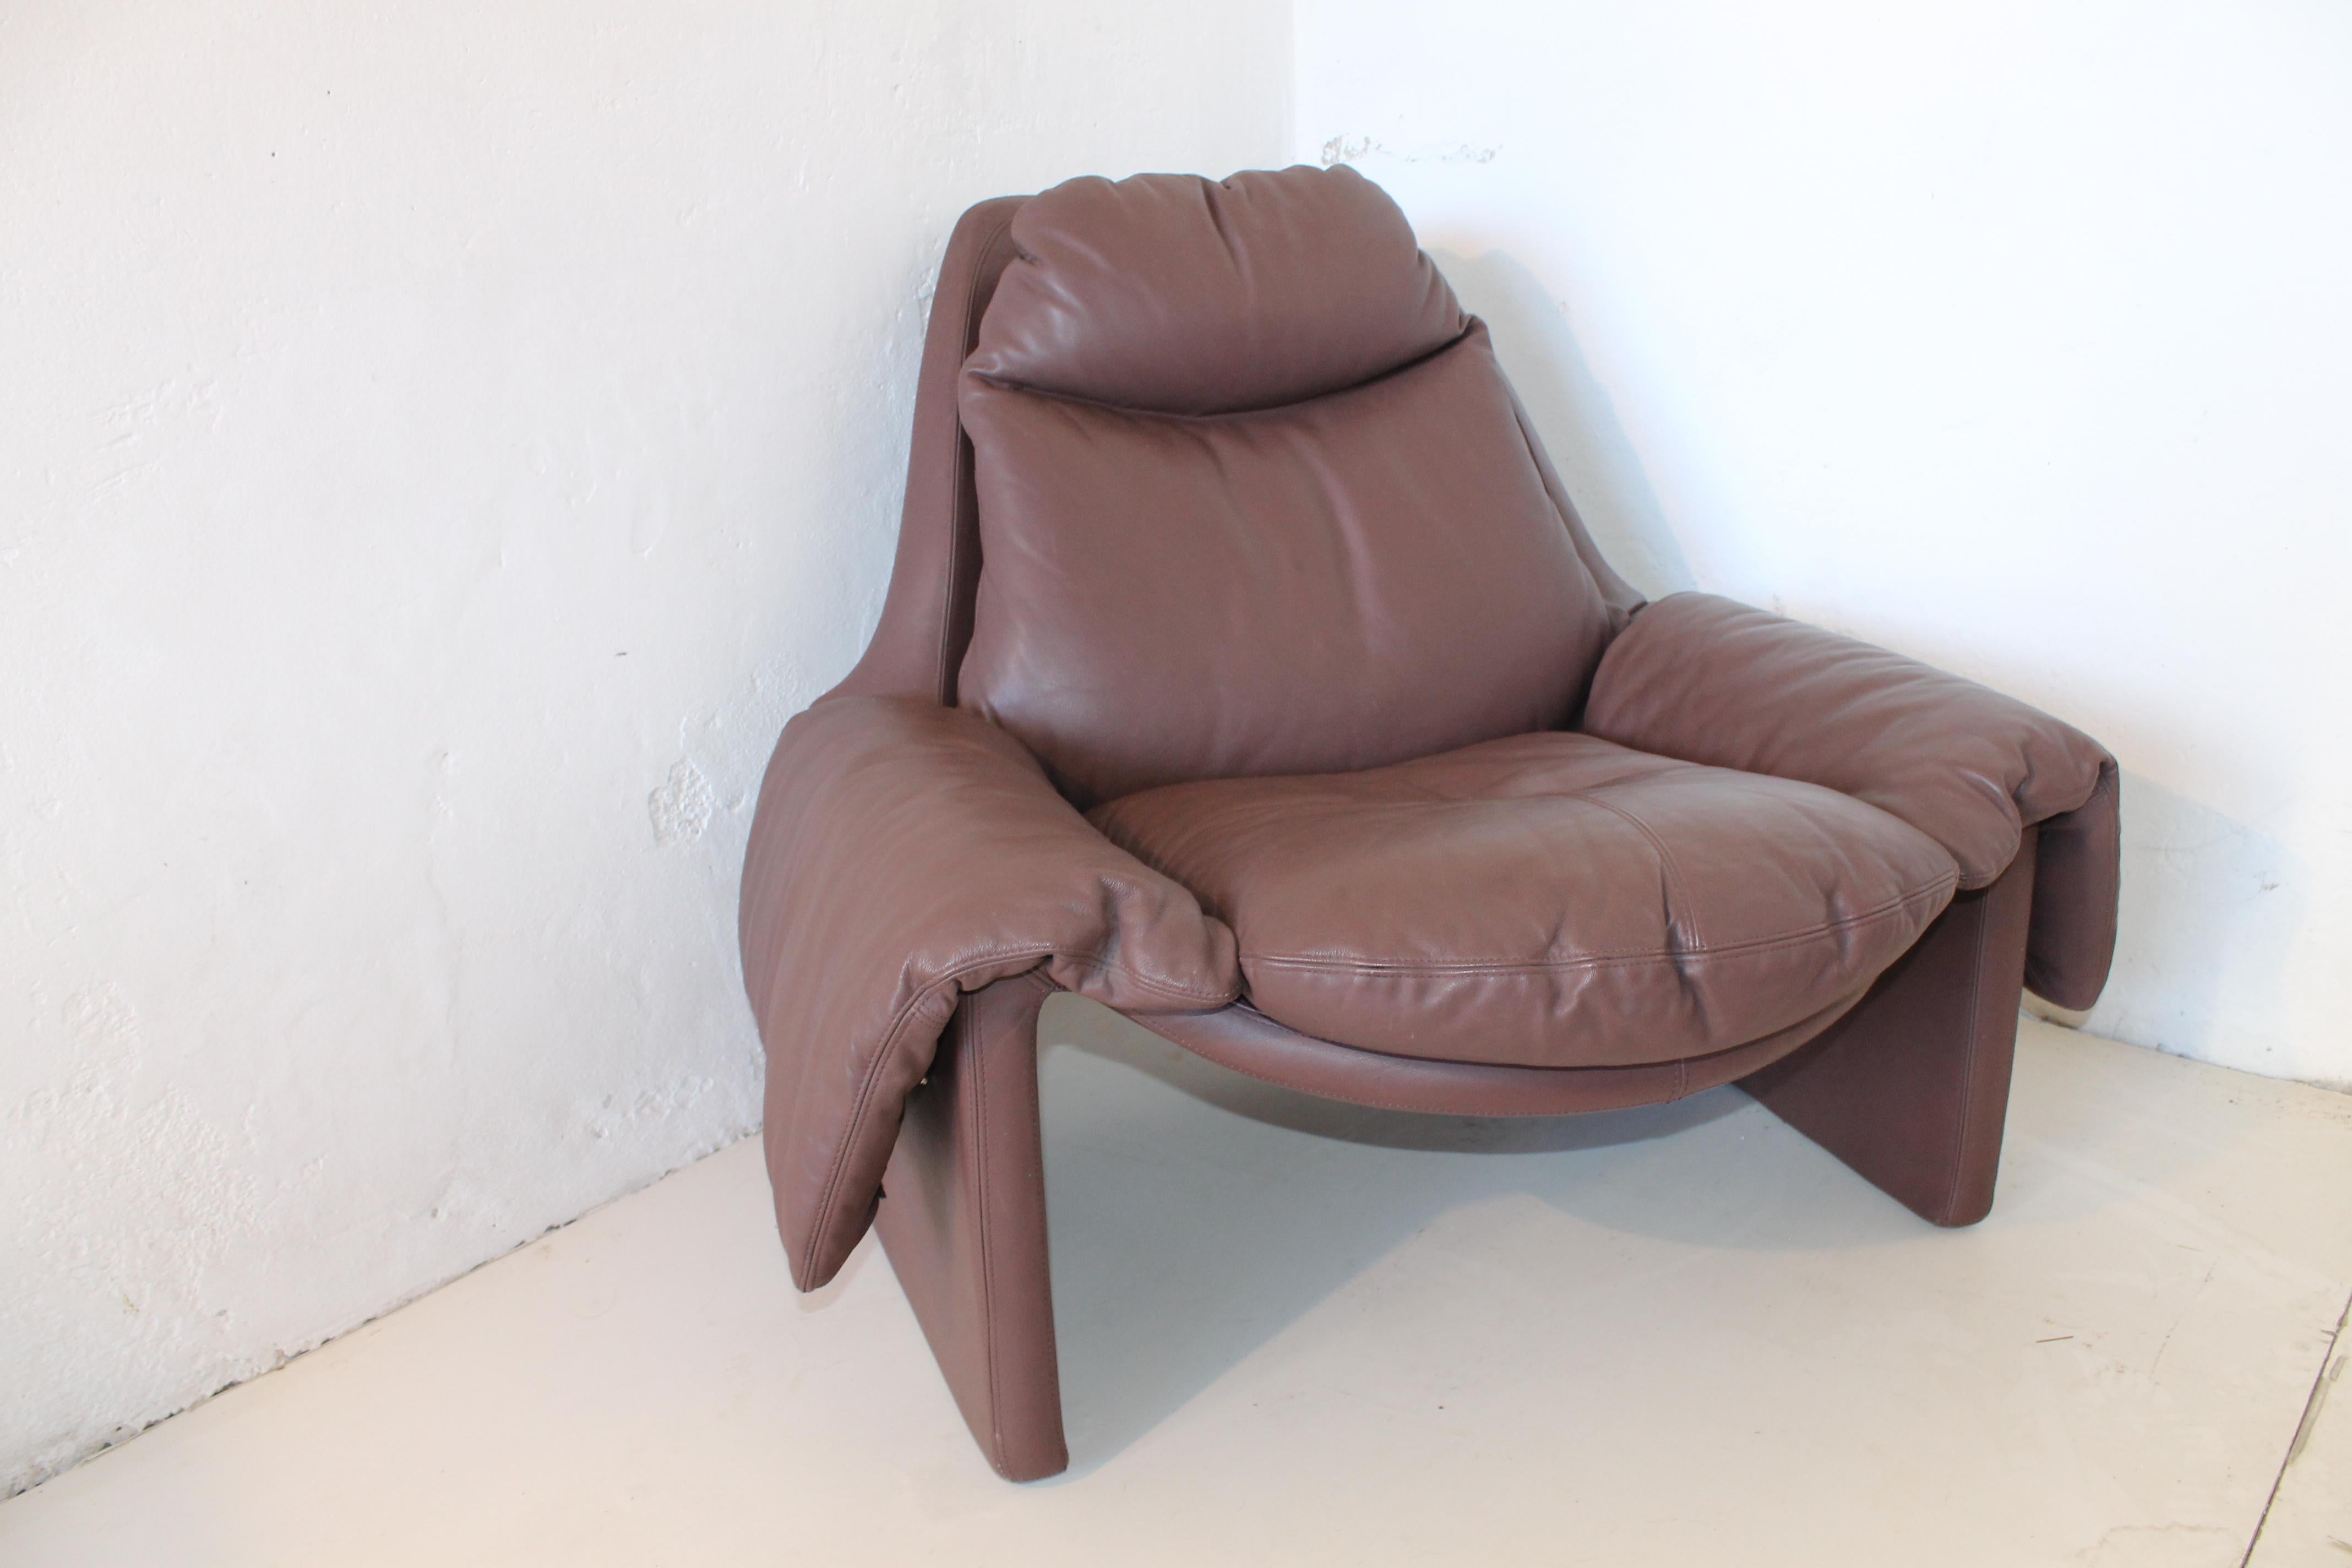 The photos do not do justice to the beautiful plum color of the armchair,

P60 Armchair and Footstool is a sophisticated piece of design furniture designed in the 1960s by Vittorio Introini,

This lounge chair and footstool was probably made in the